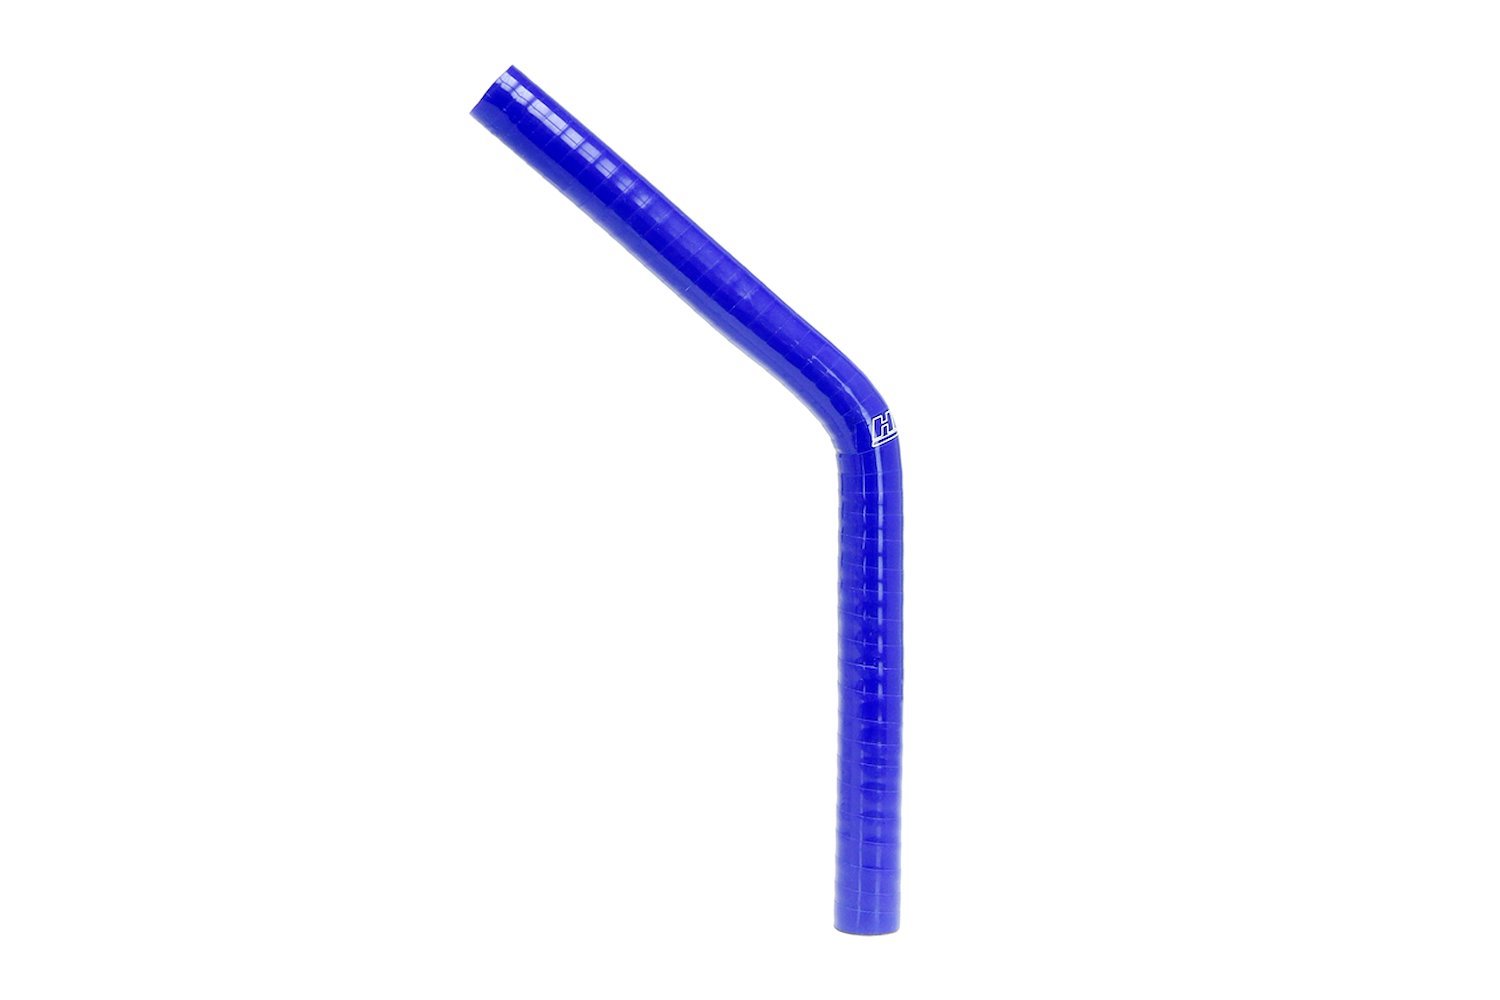 HTSEC45-062-L10-BLUE Silicone 45-Degree Elbow Hose, High-Temp 4-Ply Reinforced, 5/8 in. ID, 10 in. Leg, Blue